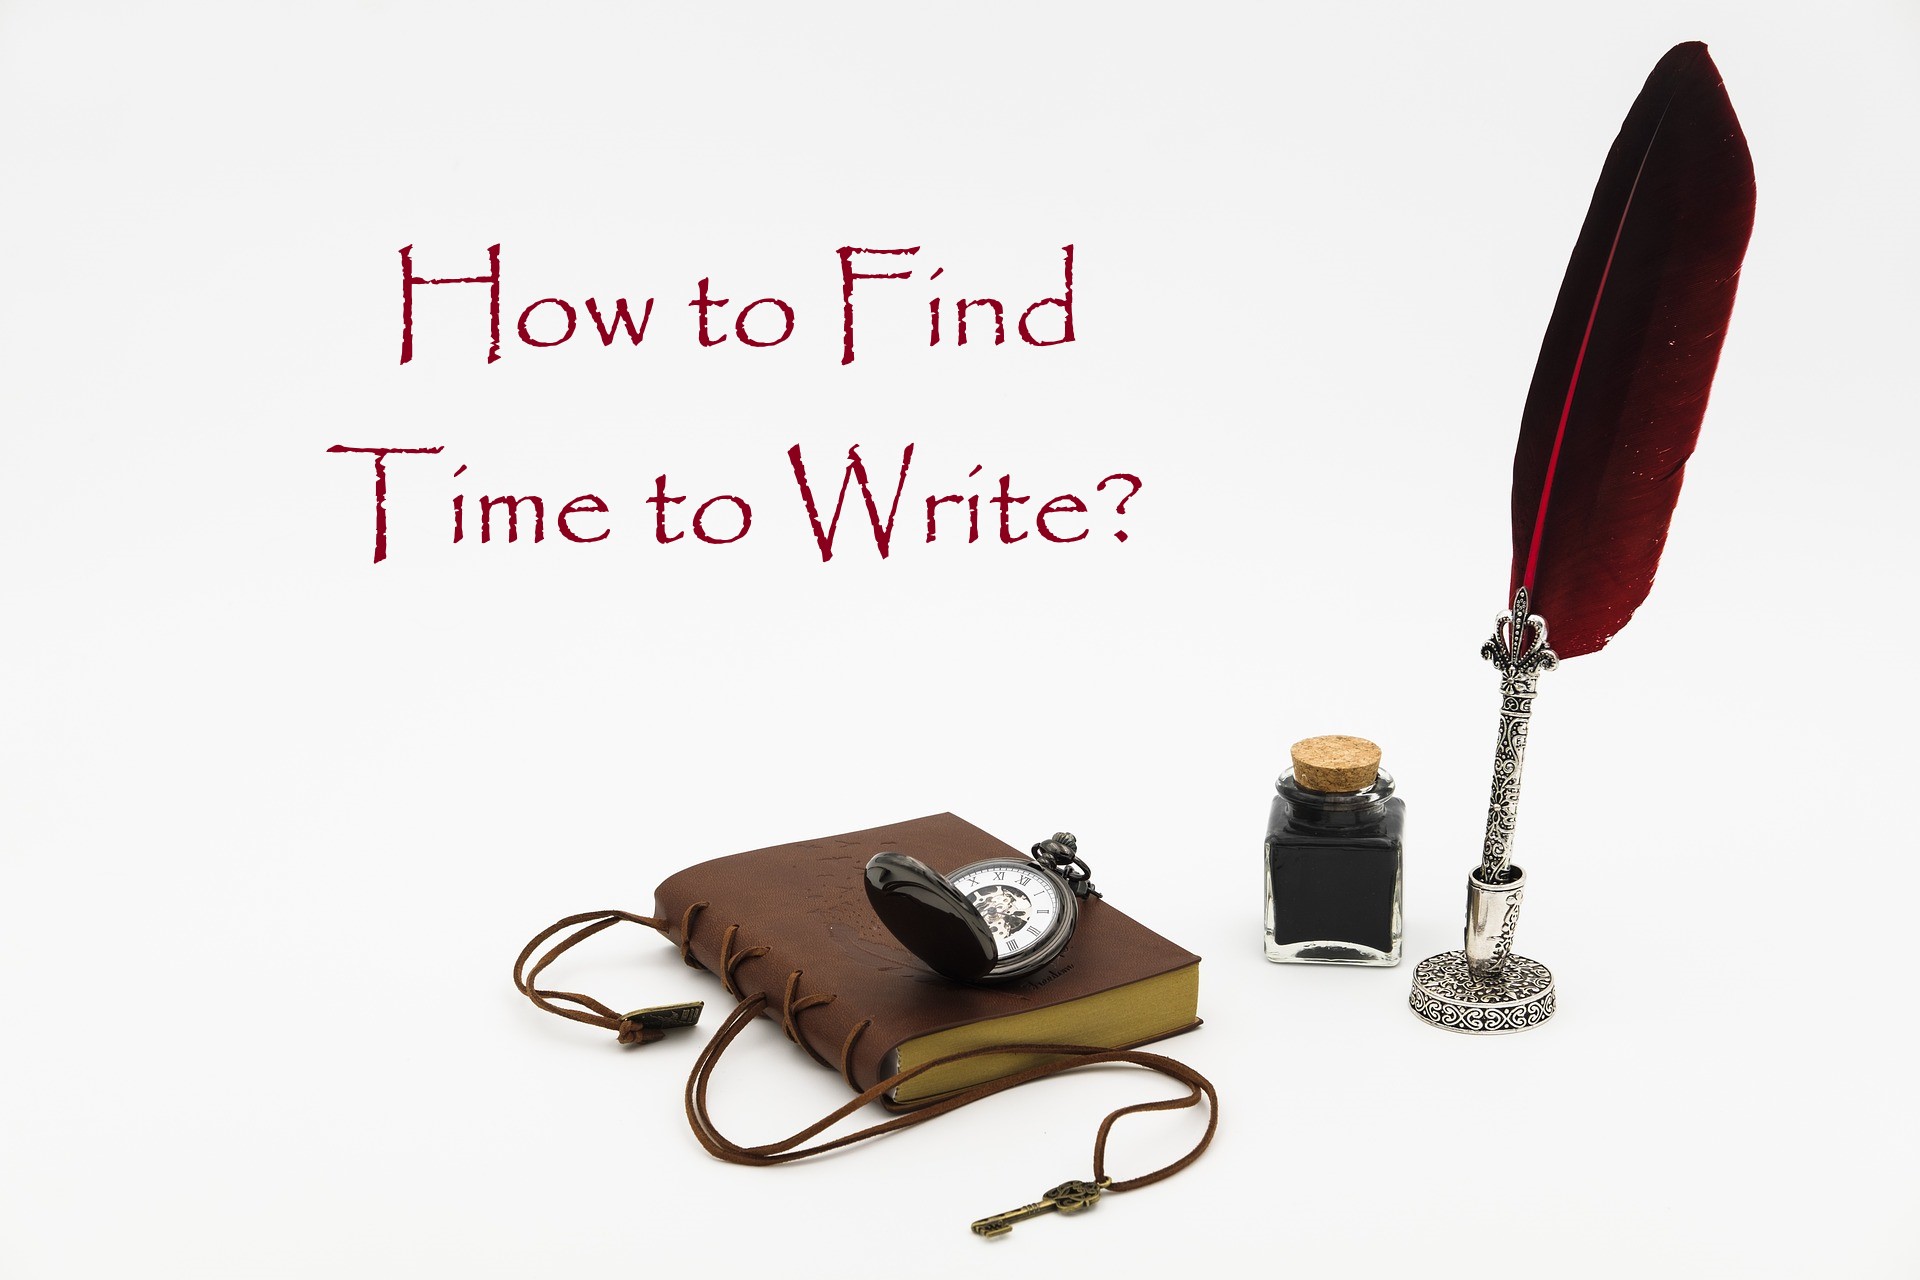 How to find time to write?